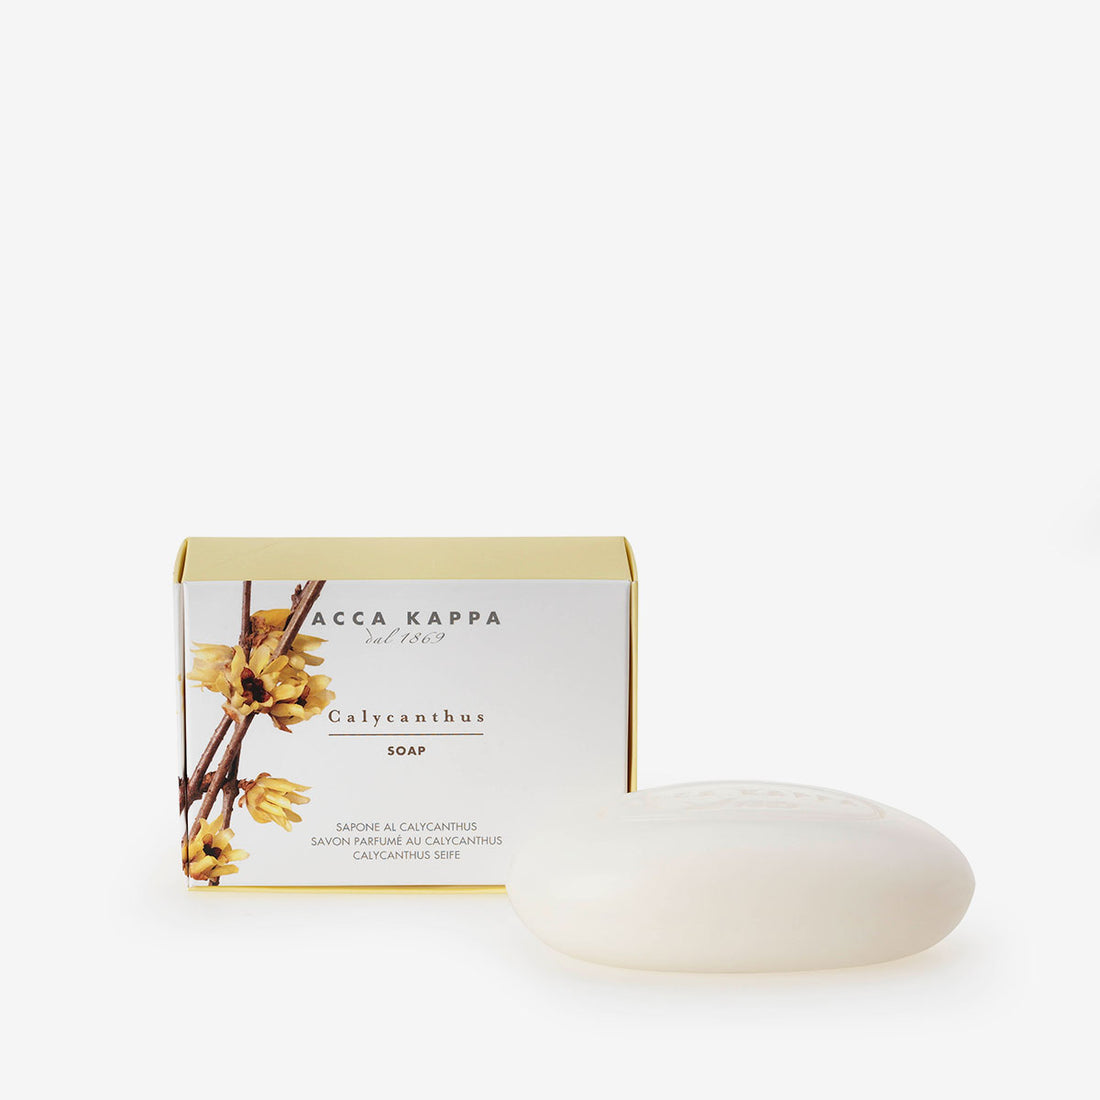 ACCA KAPPA Calycanthus Soap (150g)